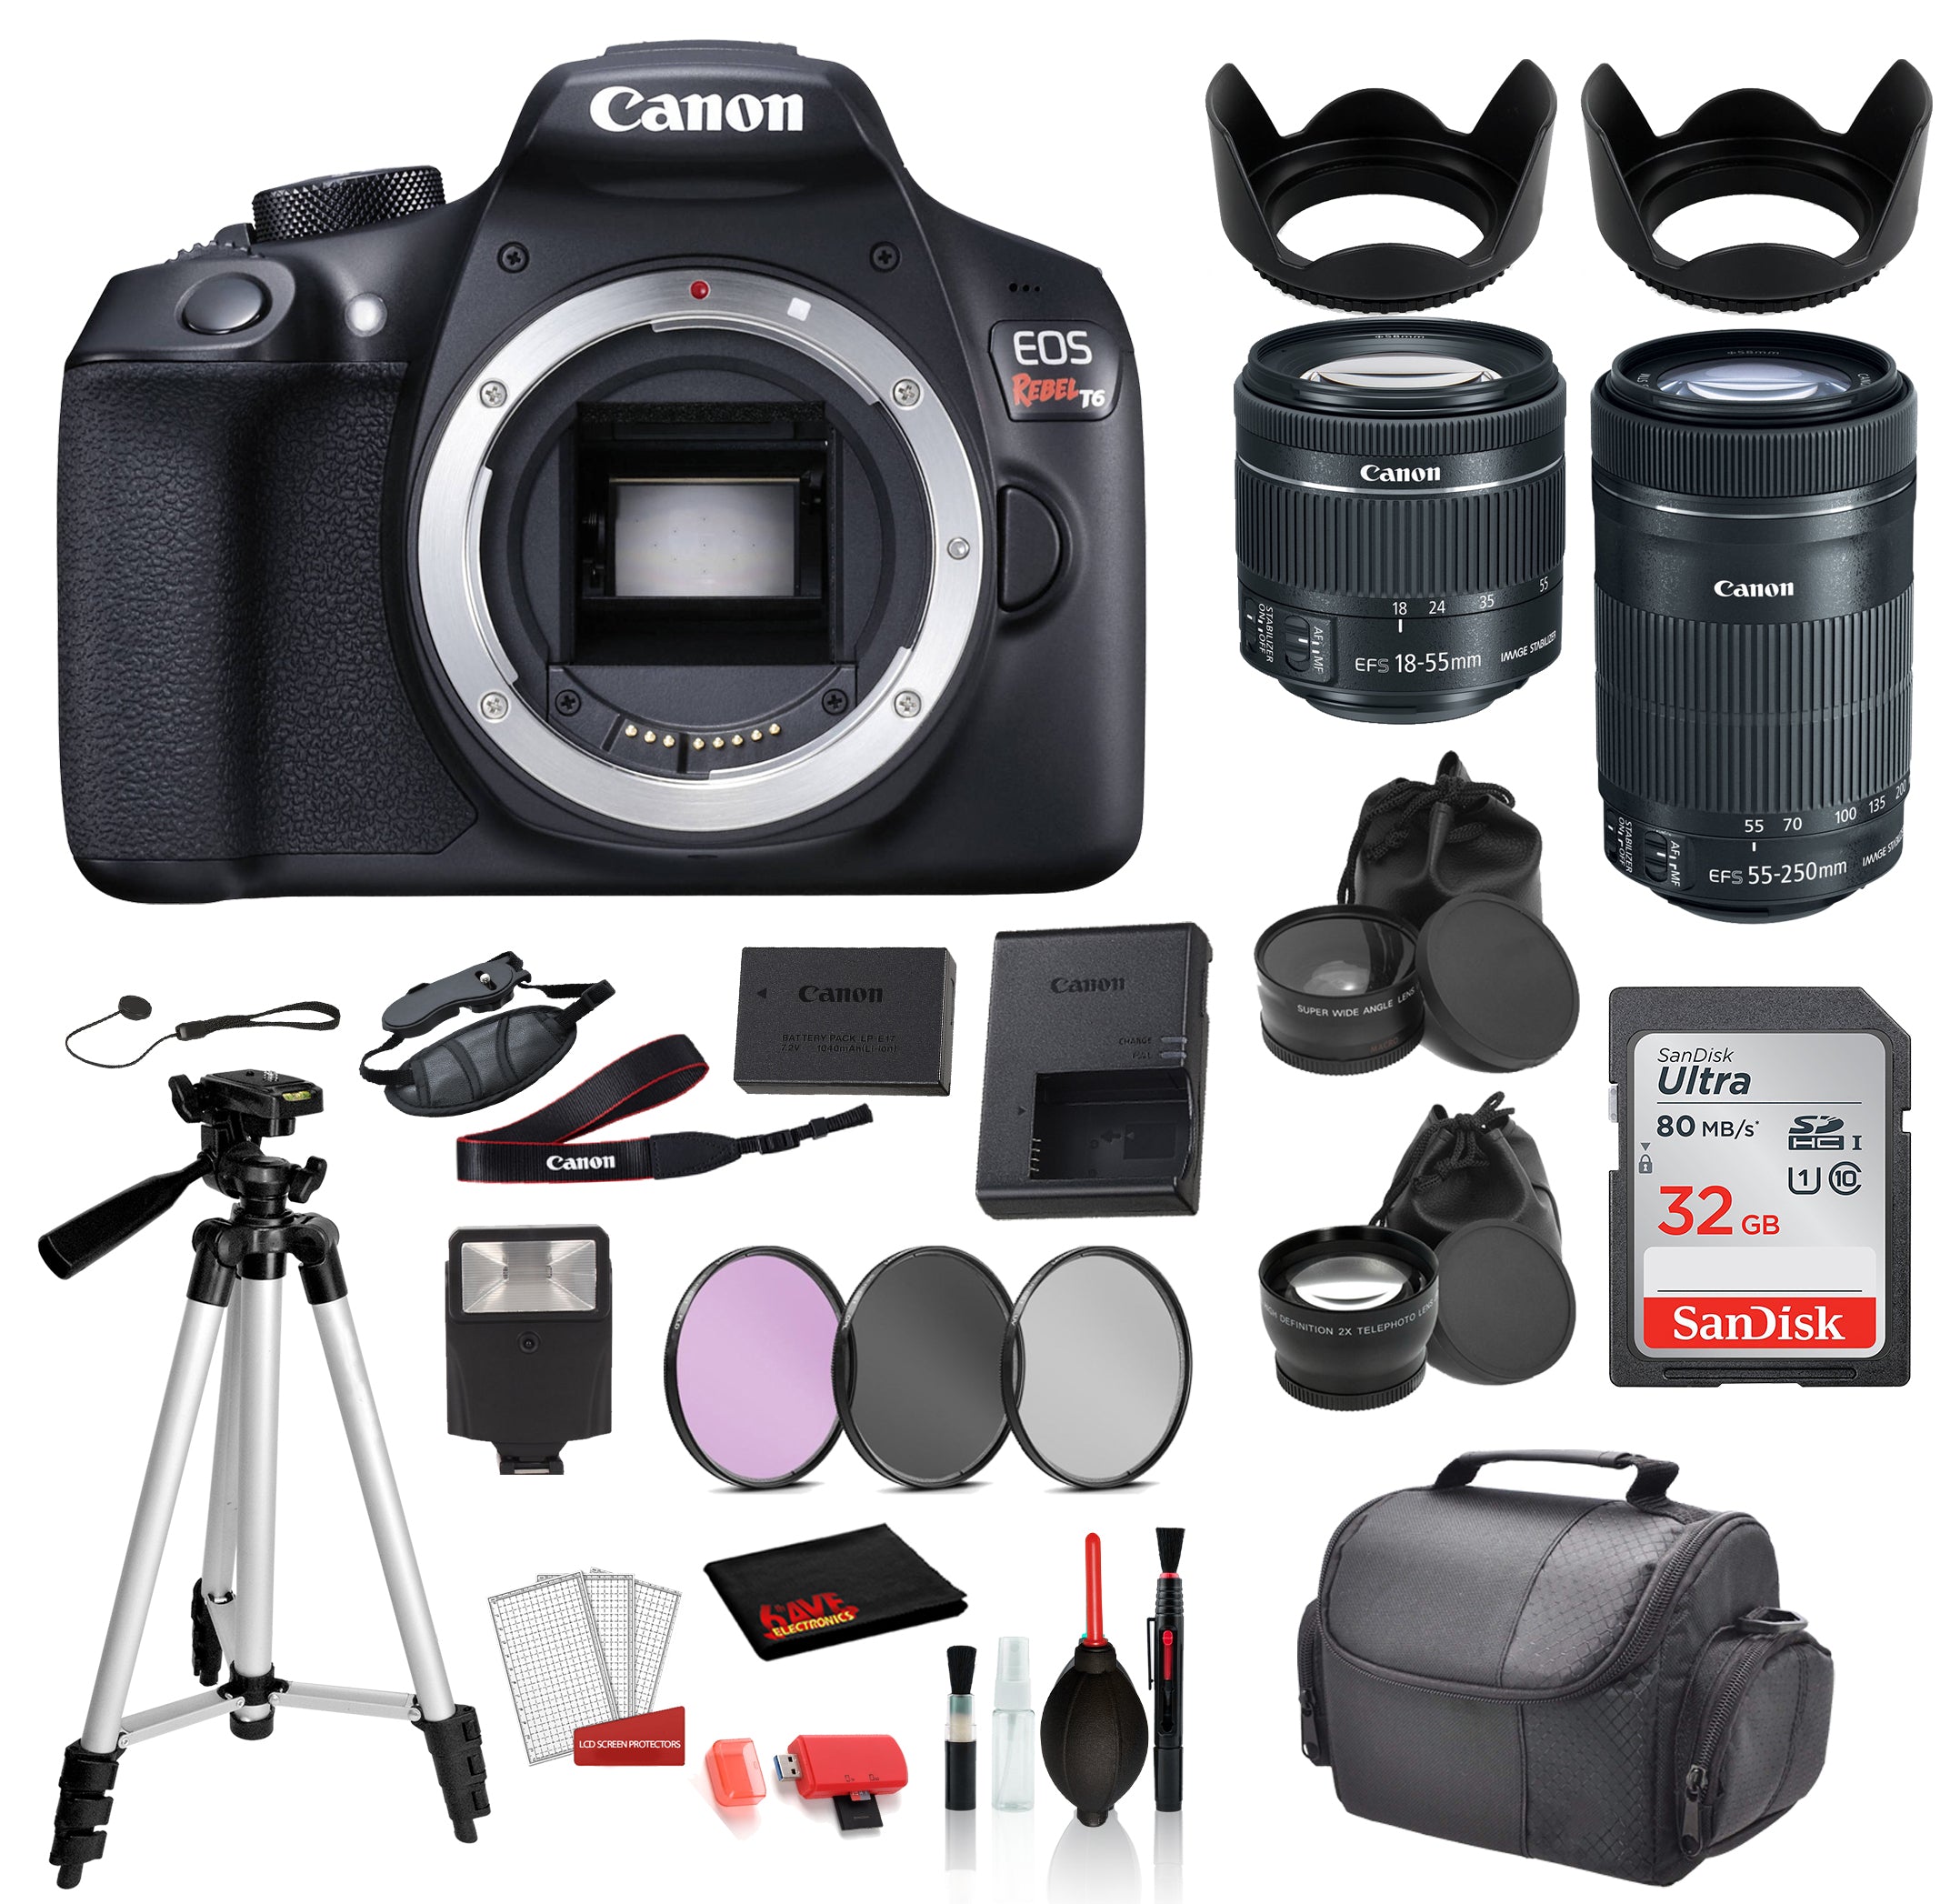 Canon EOS Rebel T6 Digital SLR Camera with 18-55mm Lens and EF-S 55-250mm Lens    SanDisk 32gb SD + 3PC Filter Kit + MORE